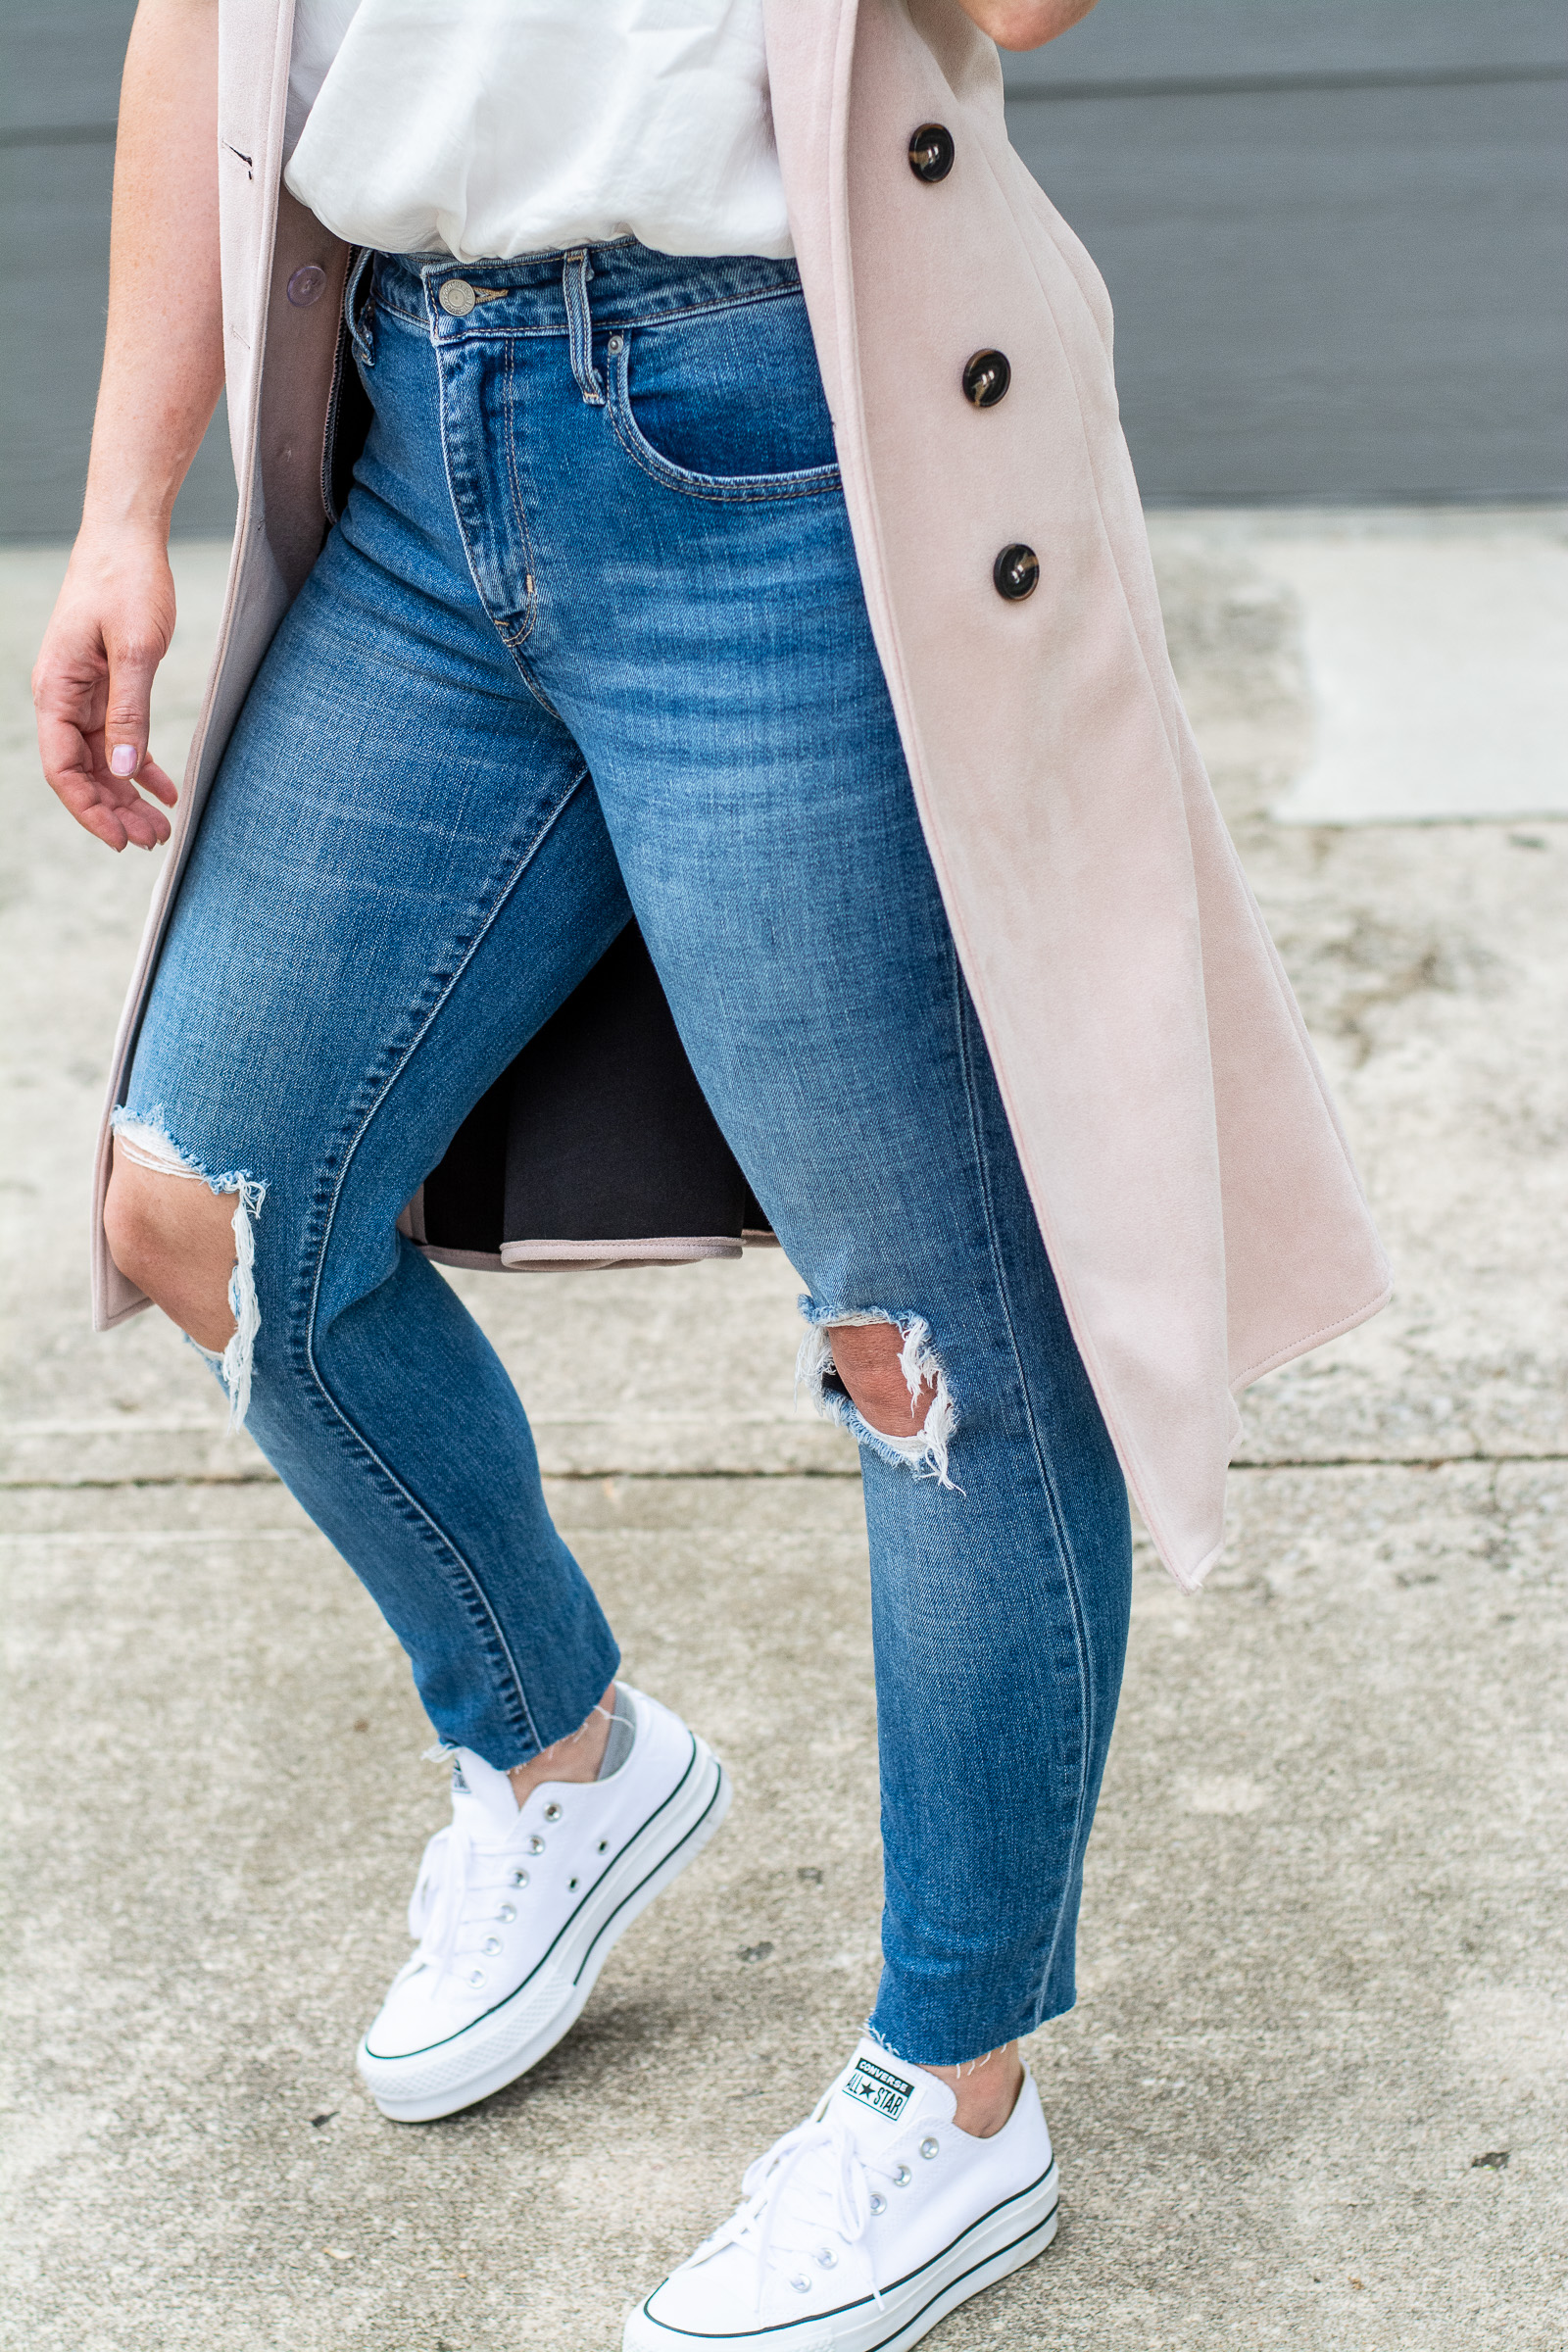 Busted-knee Jeans + White Converse Sneakers. | LSR